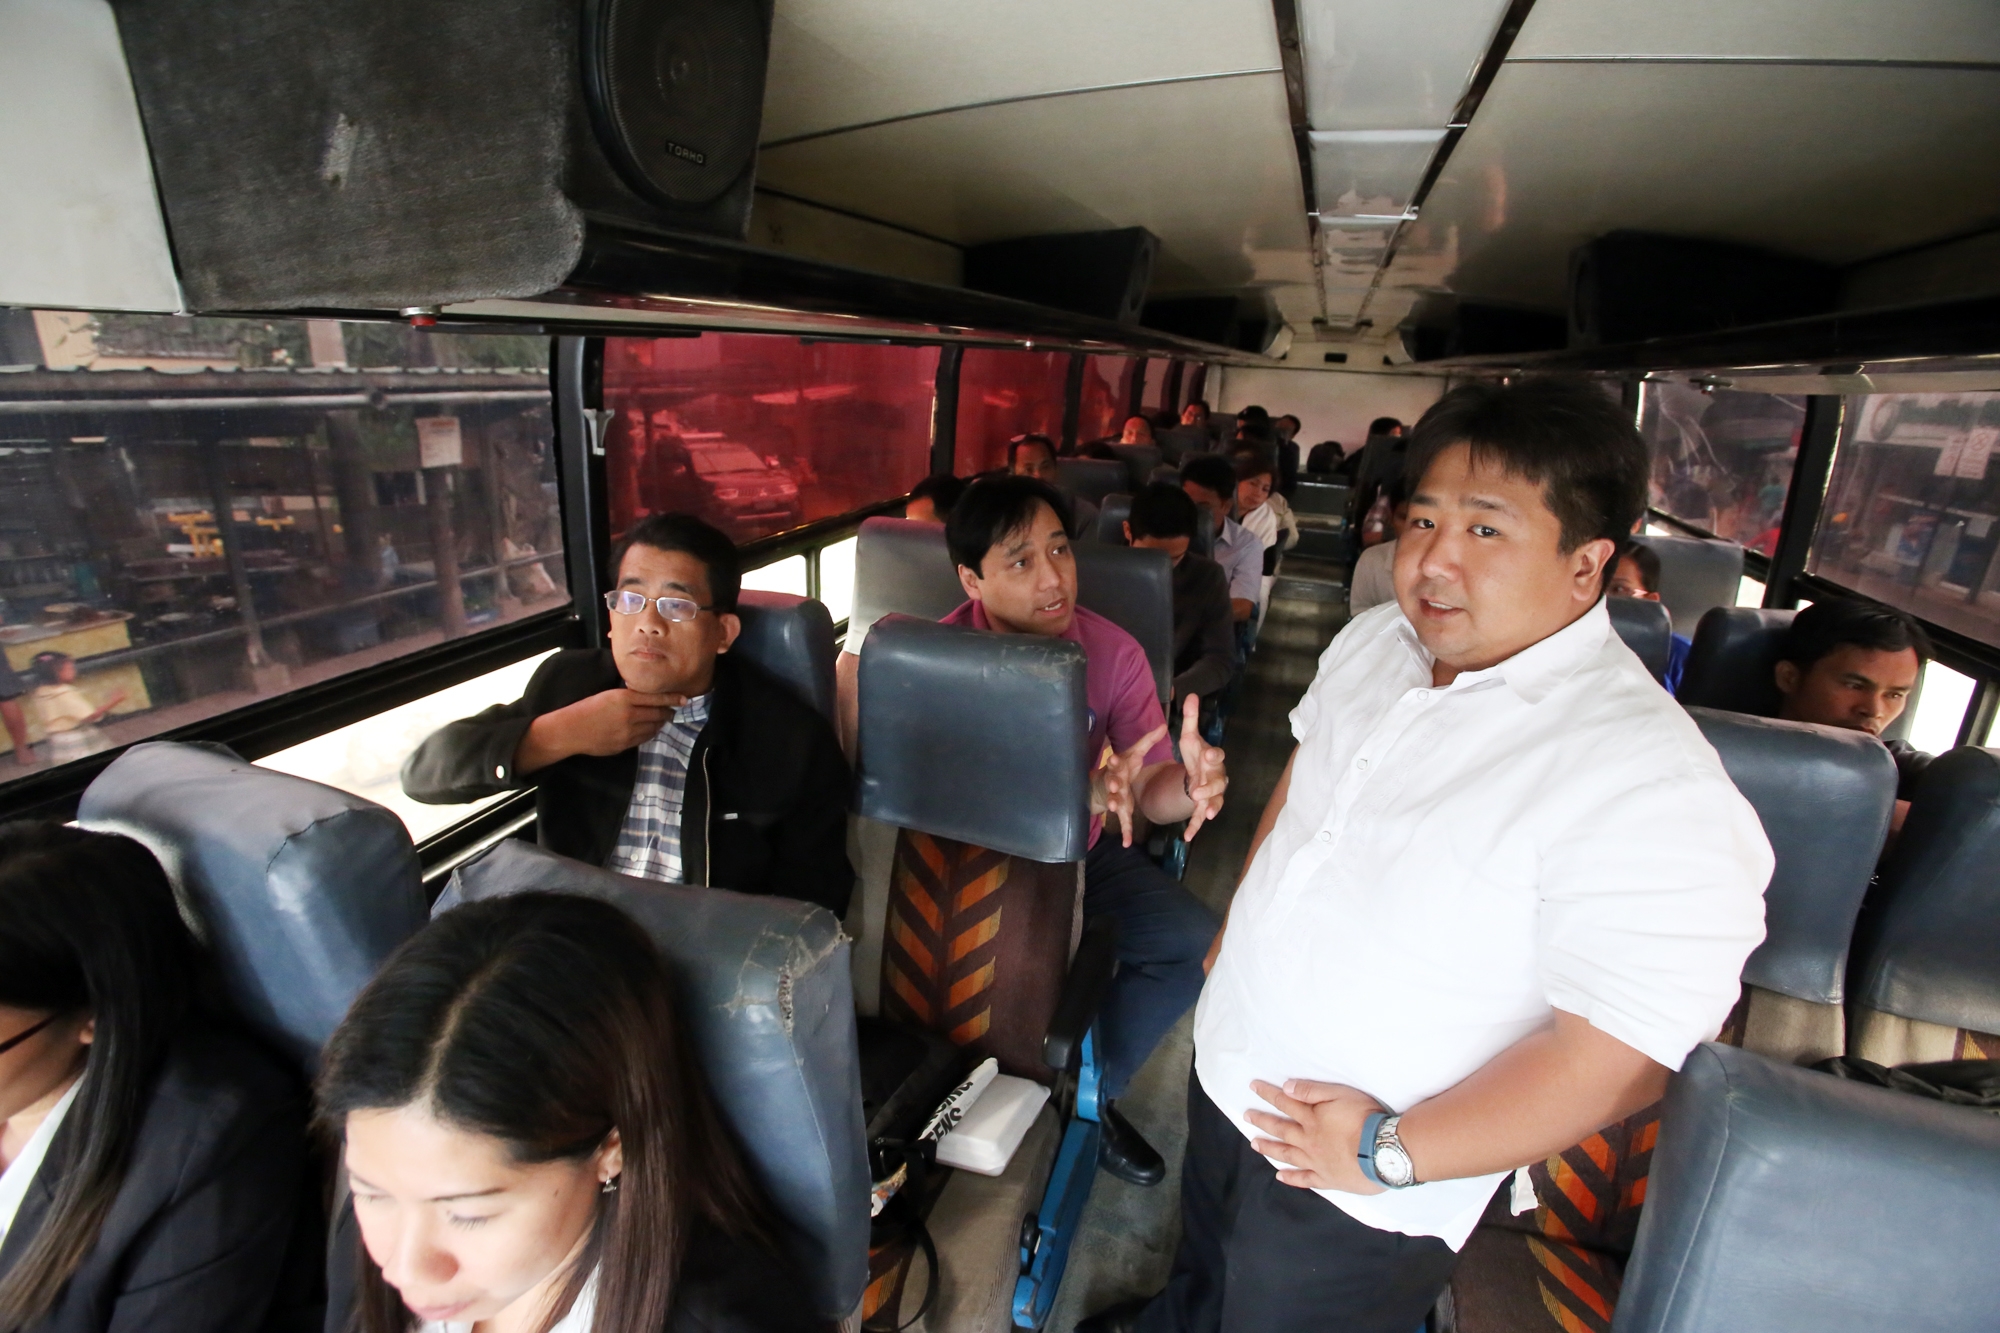 BRT Cebu manager Rafael Yap accompanies Winston Ginez, Land Transportation Franchising and Regulatory Board (LTFRB) chairman and LTFRB member Antonio Ariel Enrile Inton (center) in inspecting the BRT route inside a Kaohsiung bus from barangay Tabunok, Talisay City to barangay Talamban, Cebu City in this January 2015 file photo.